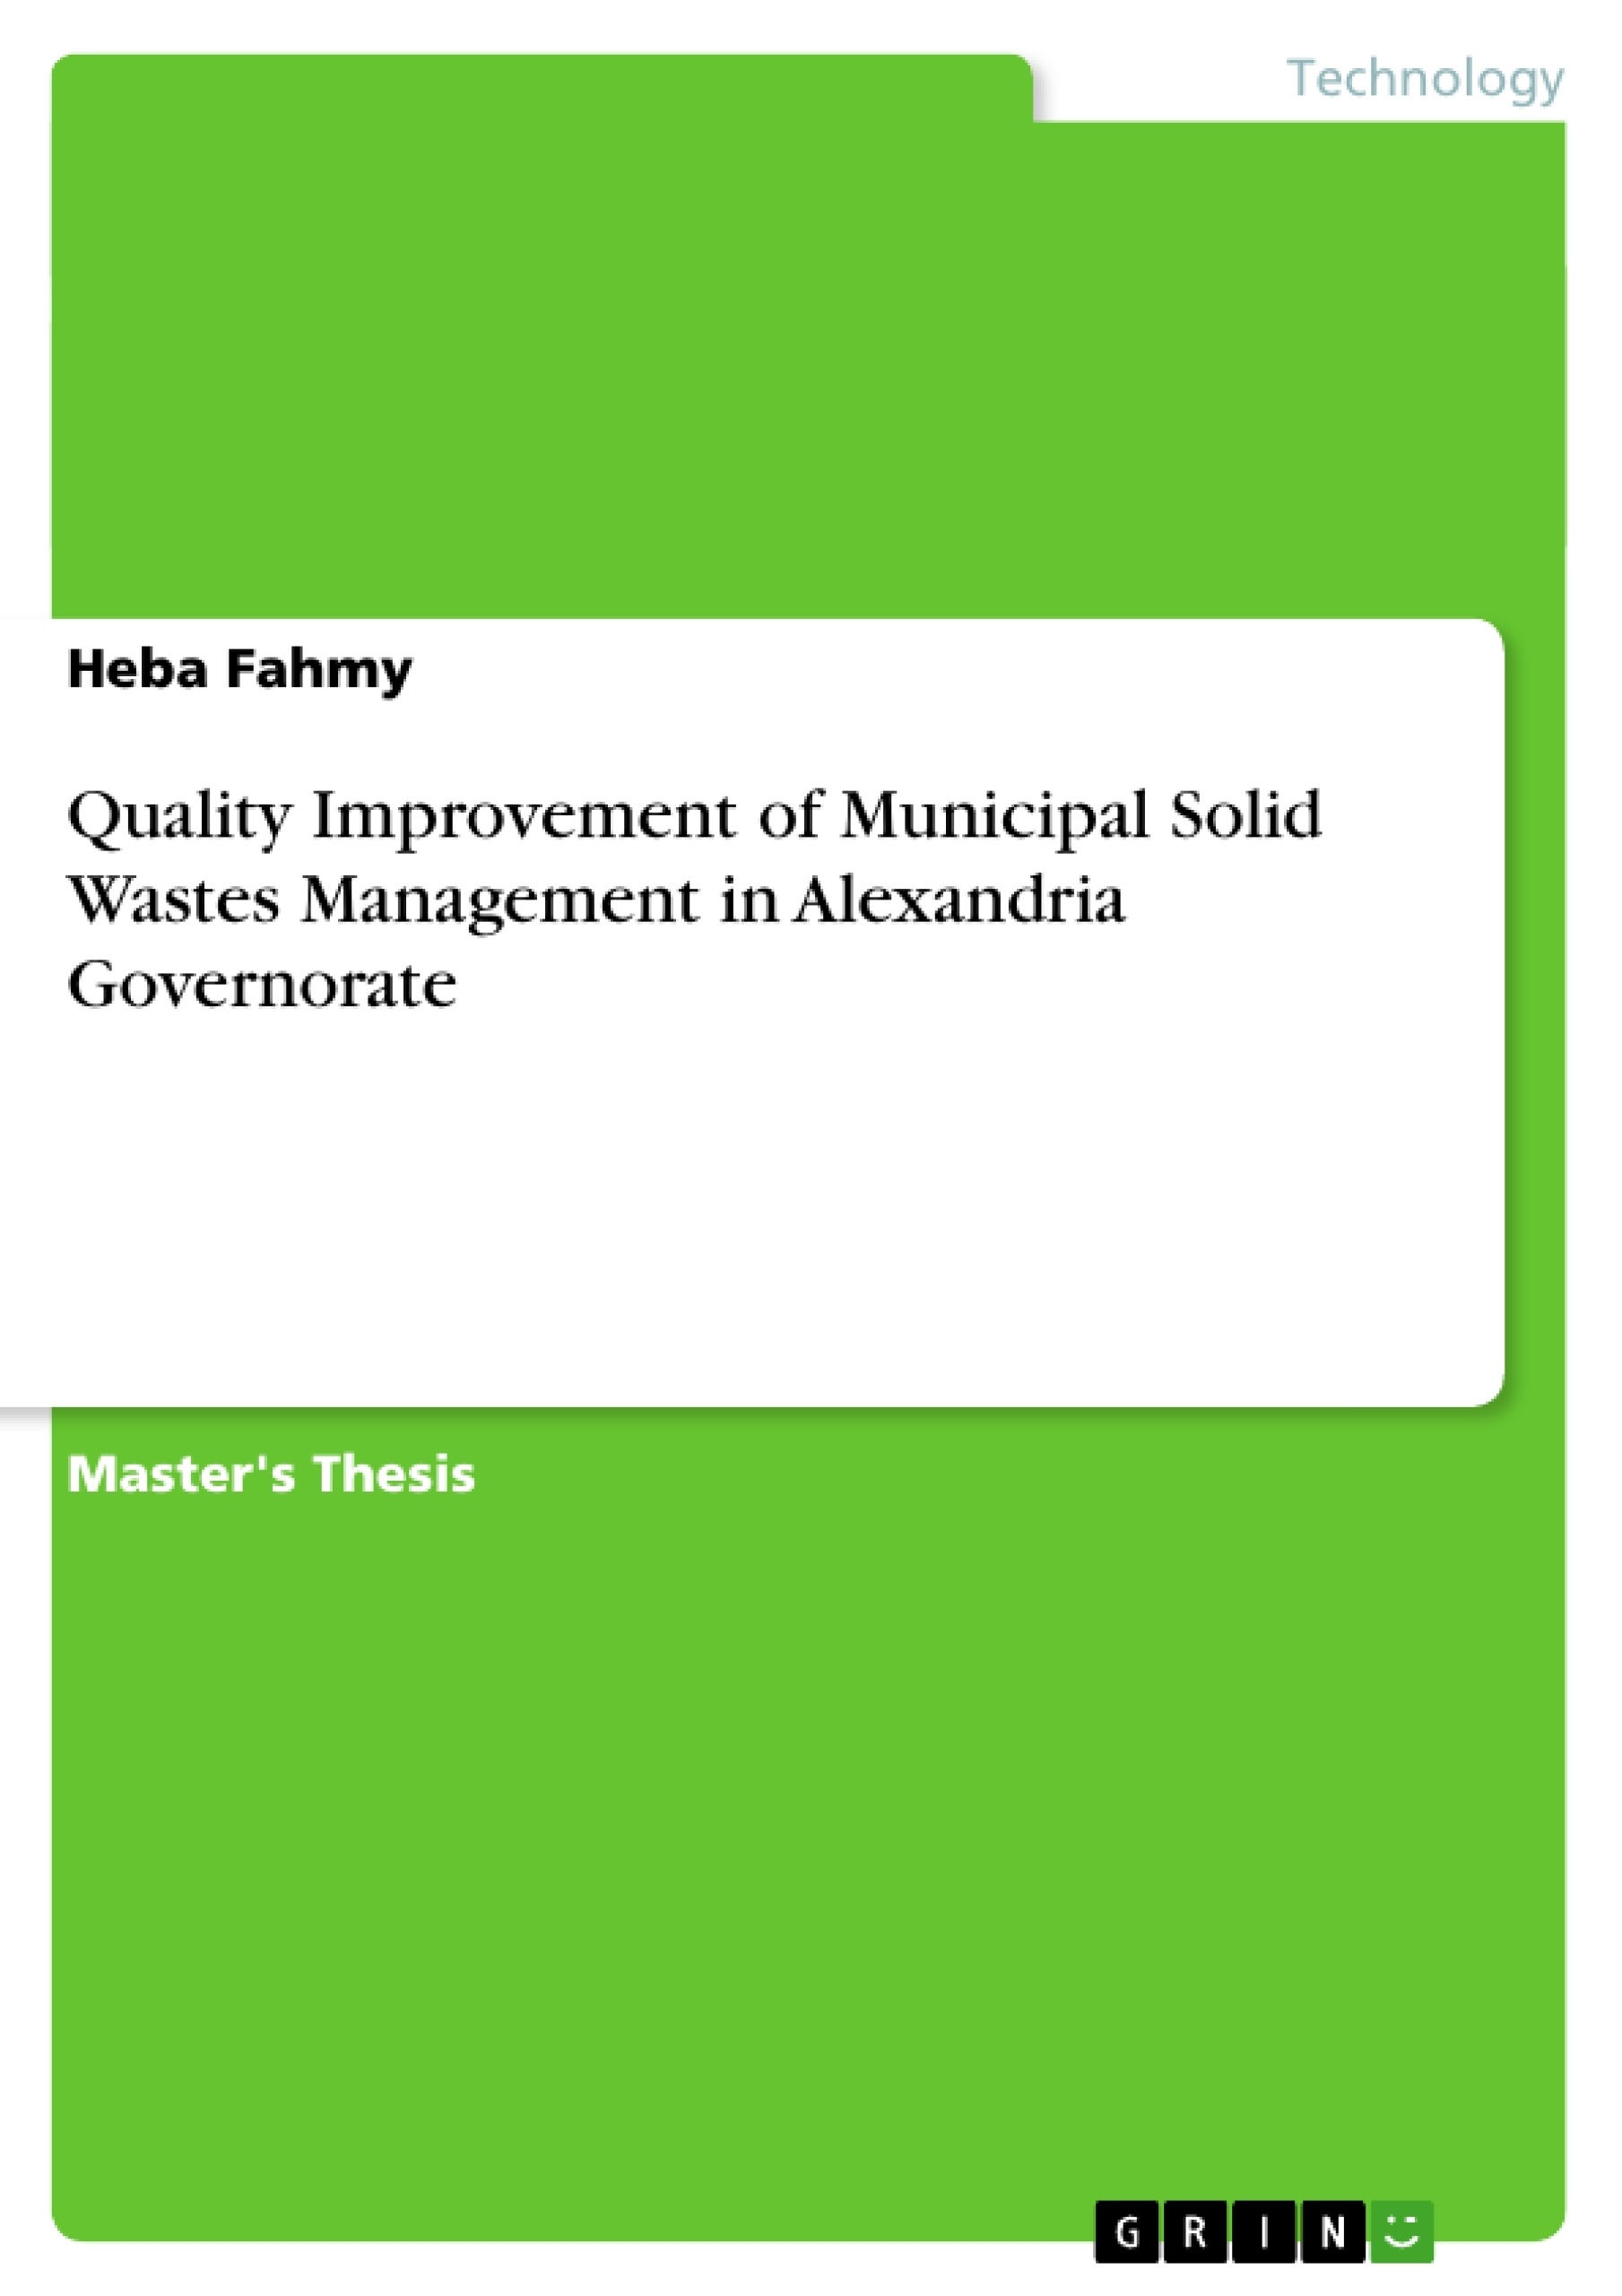 Master thesis waste management